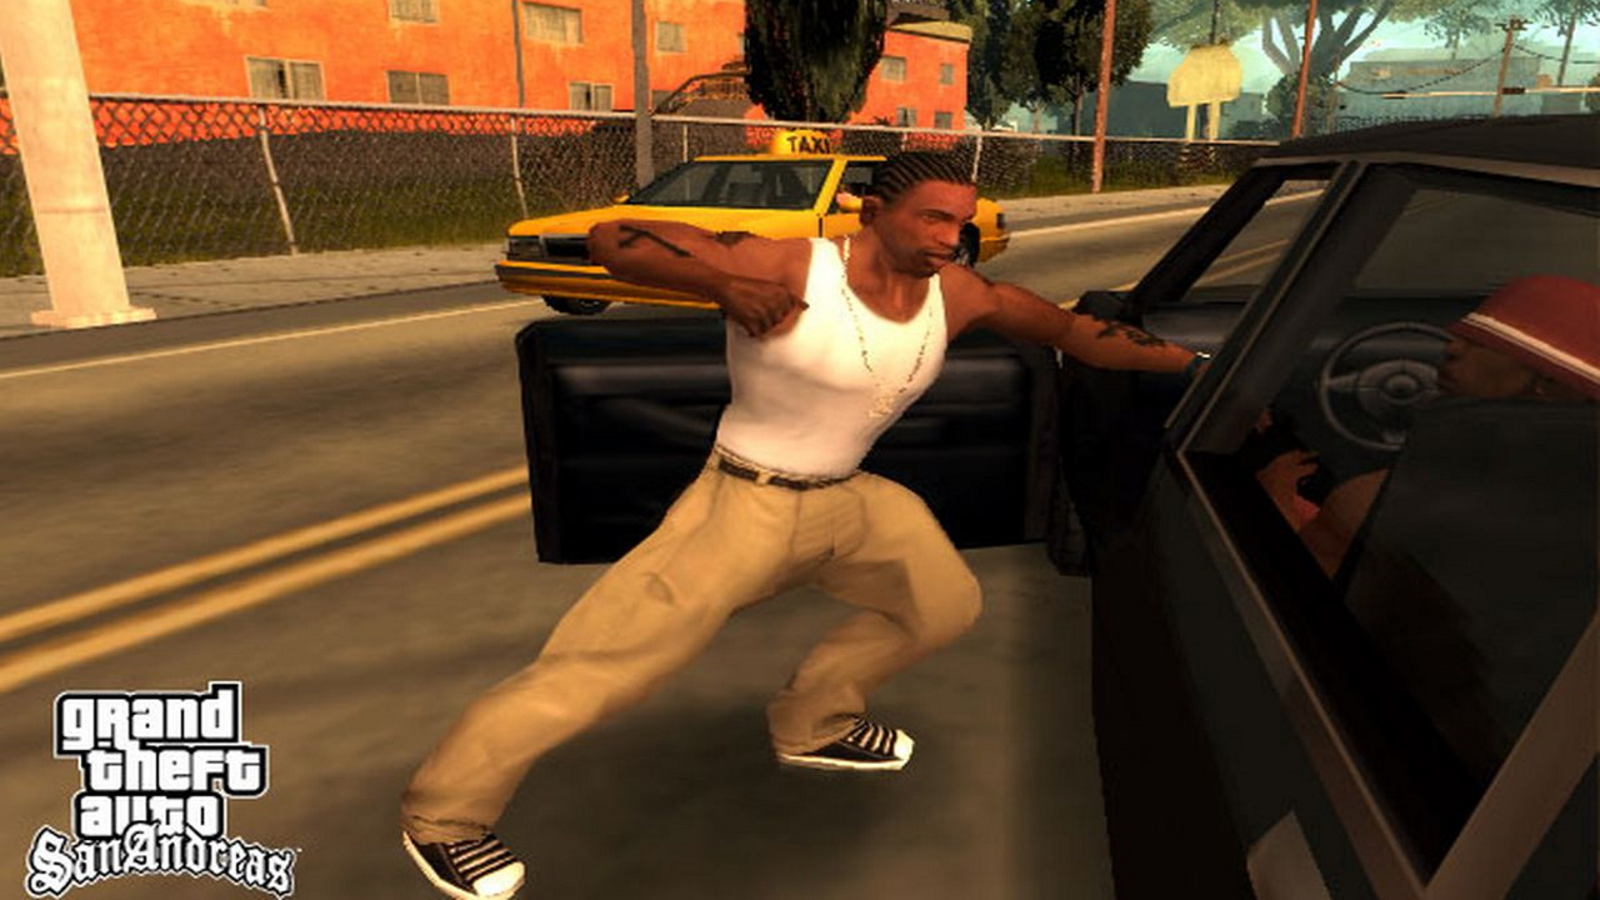 The best weapons in GTA San Andreas - Handguns, rocket launchers, and more  | VG247